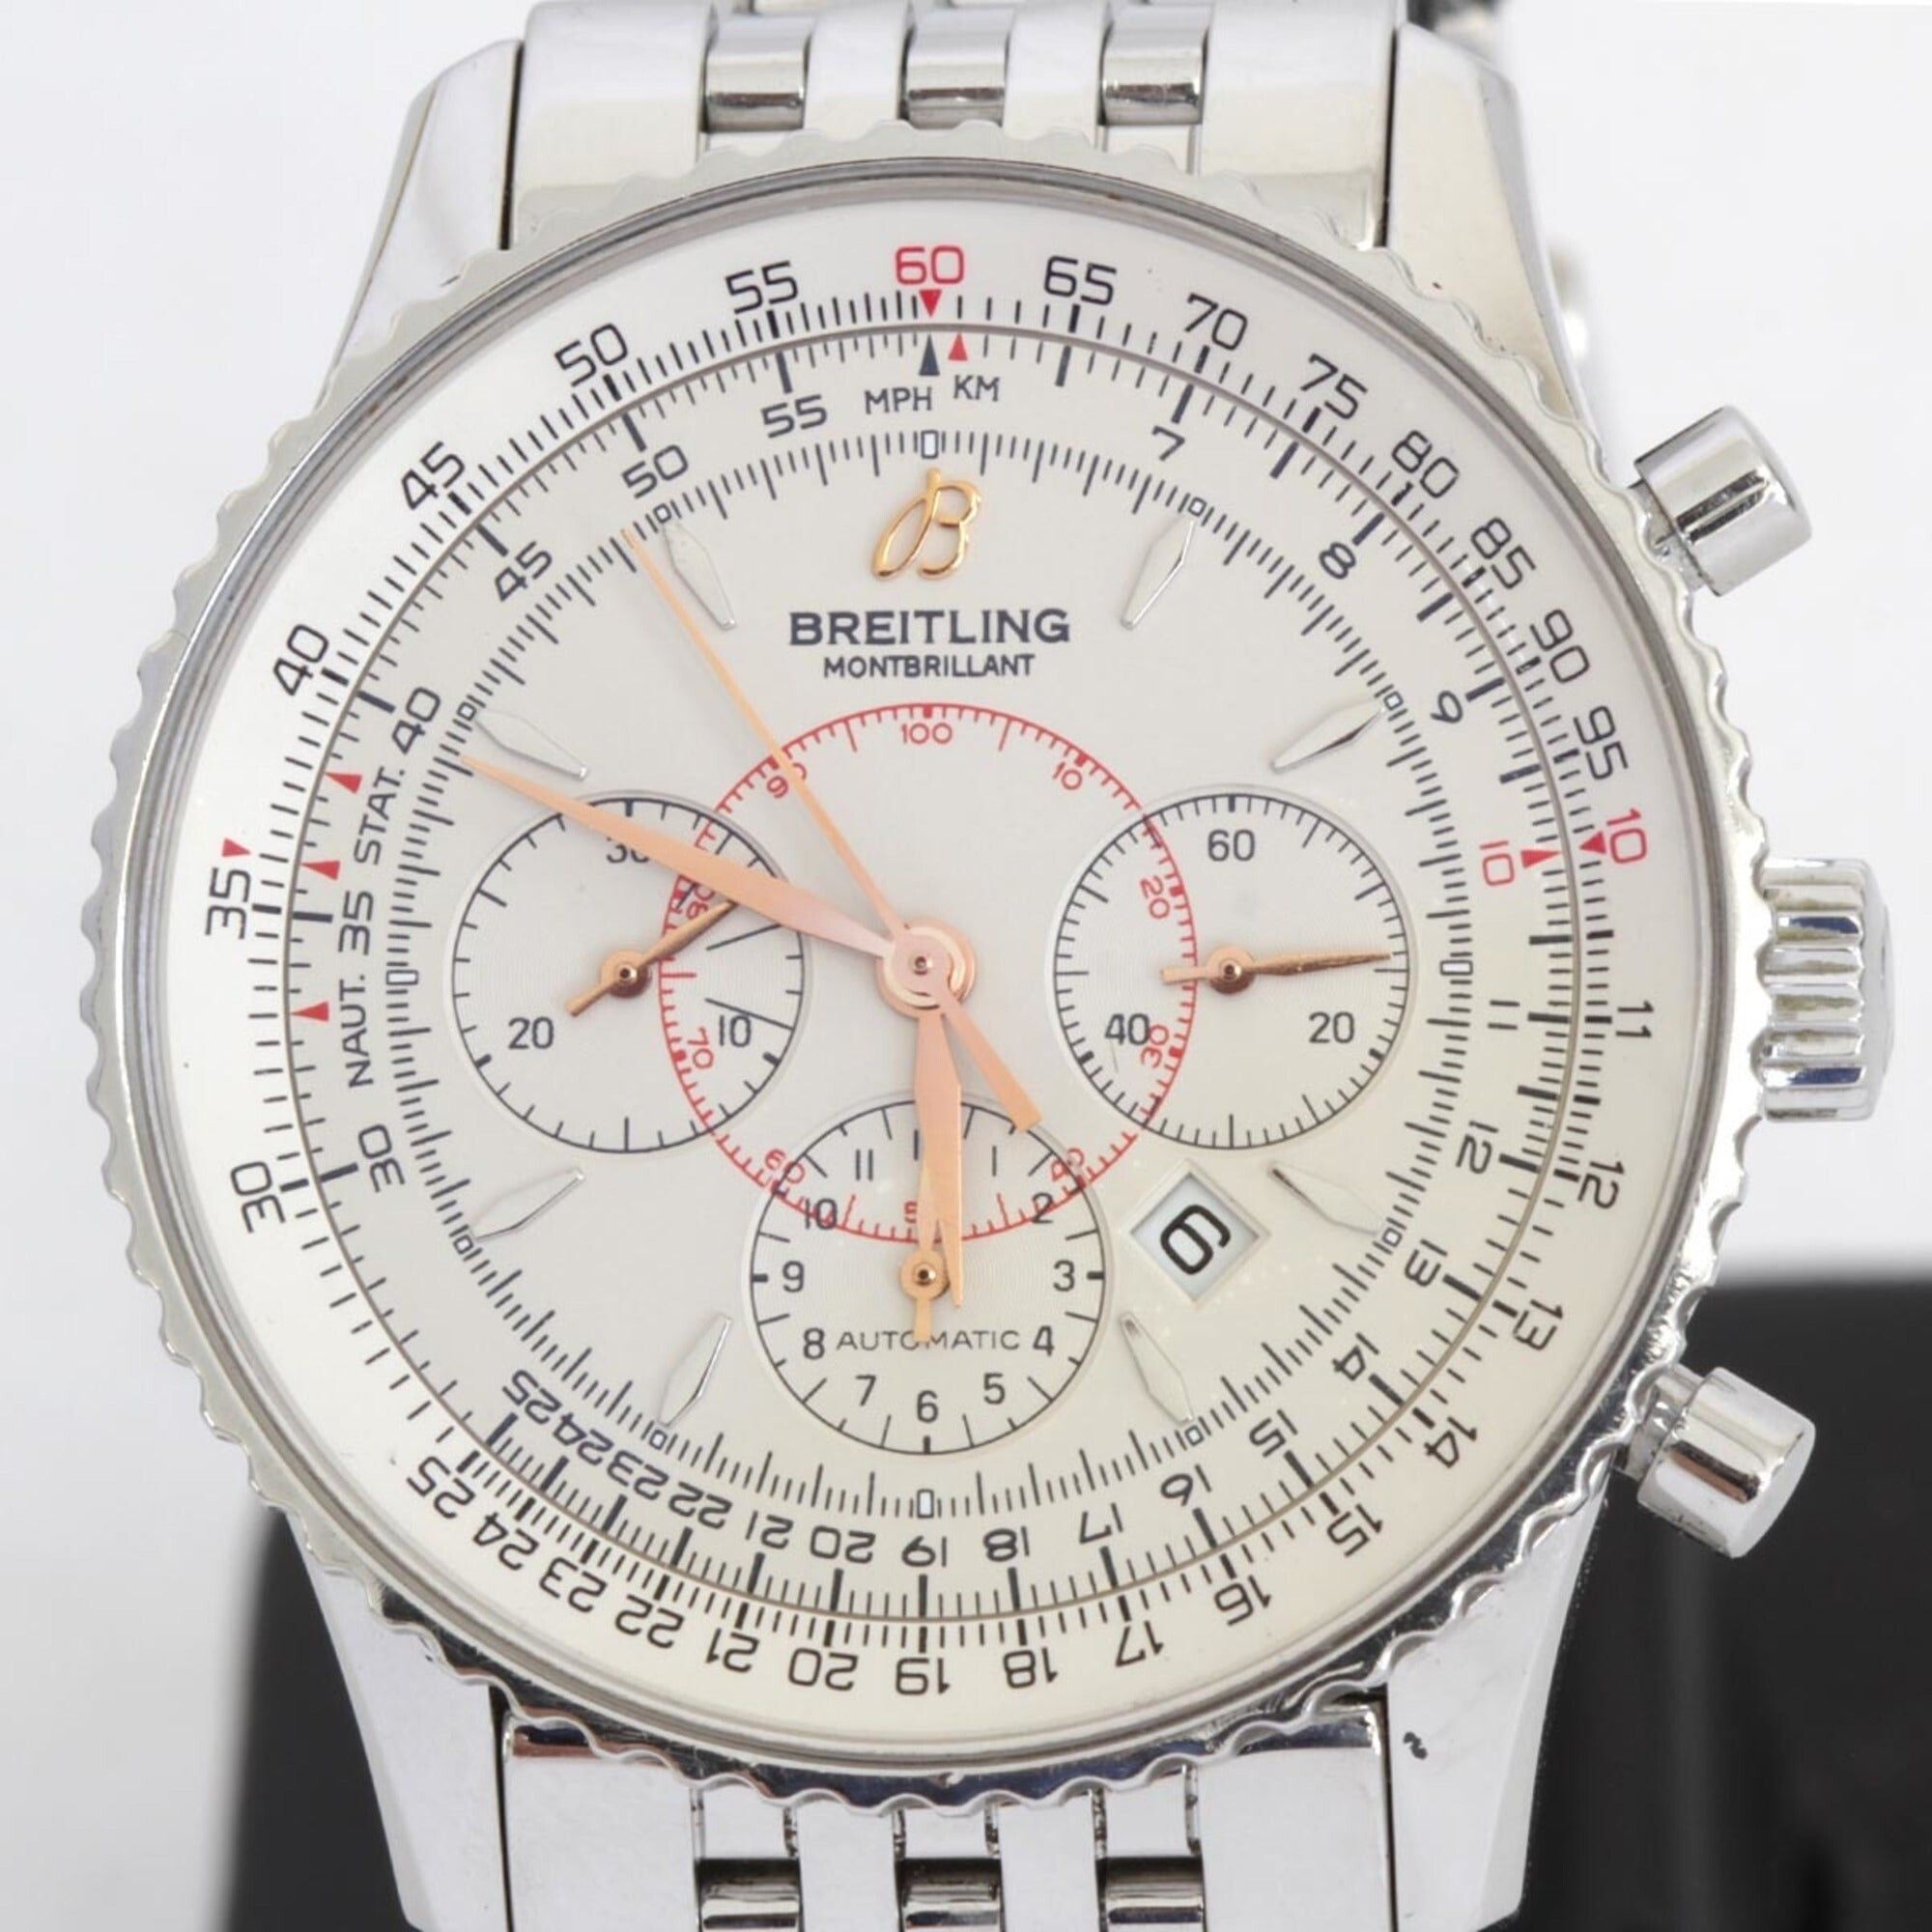 image of Breitling Montbrillant A41370 Watch Automatic Men's in Silver